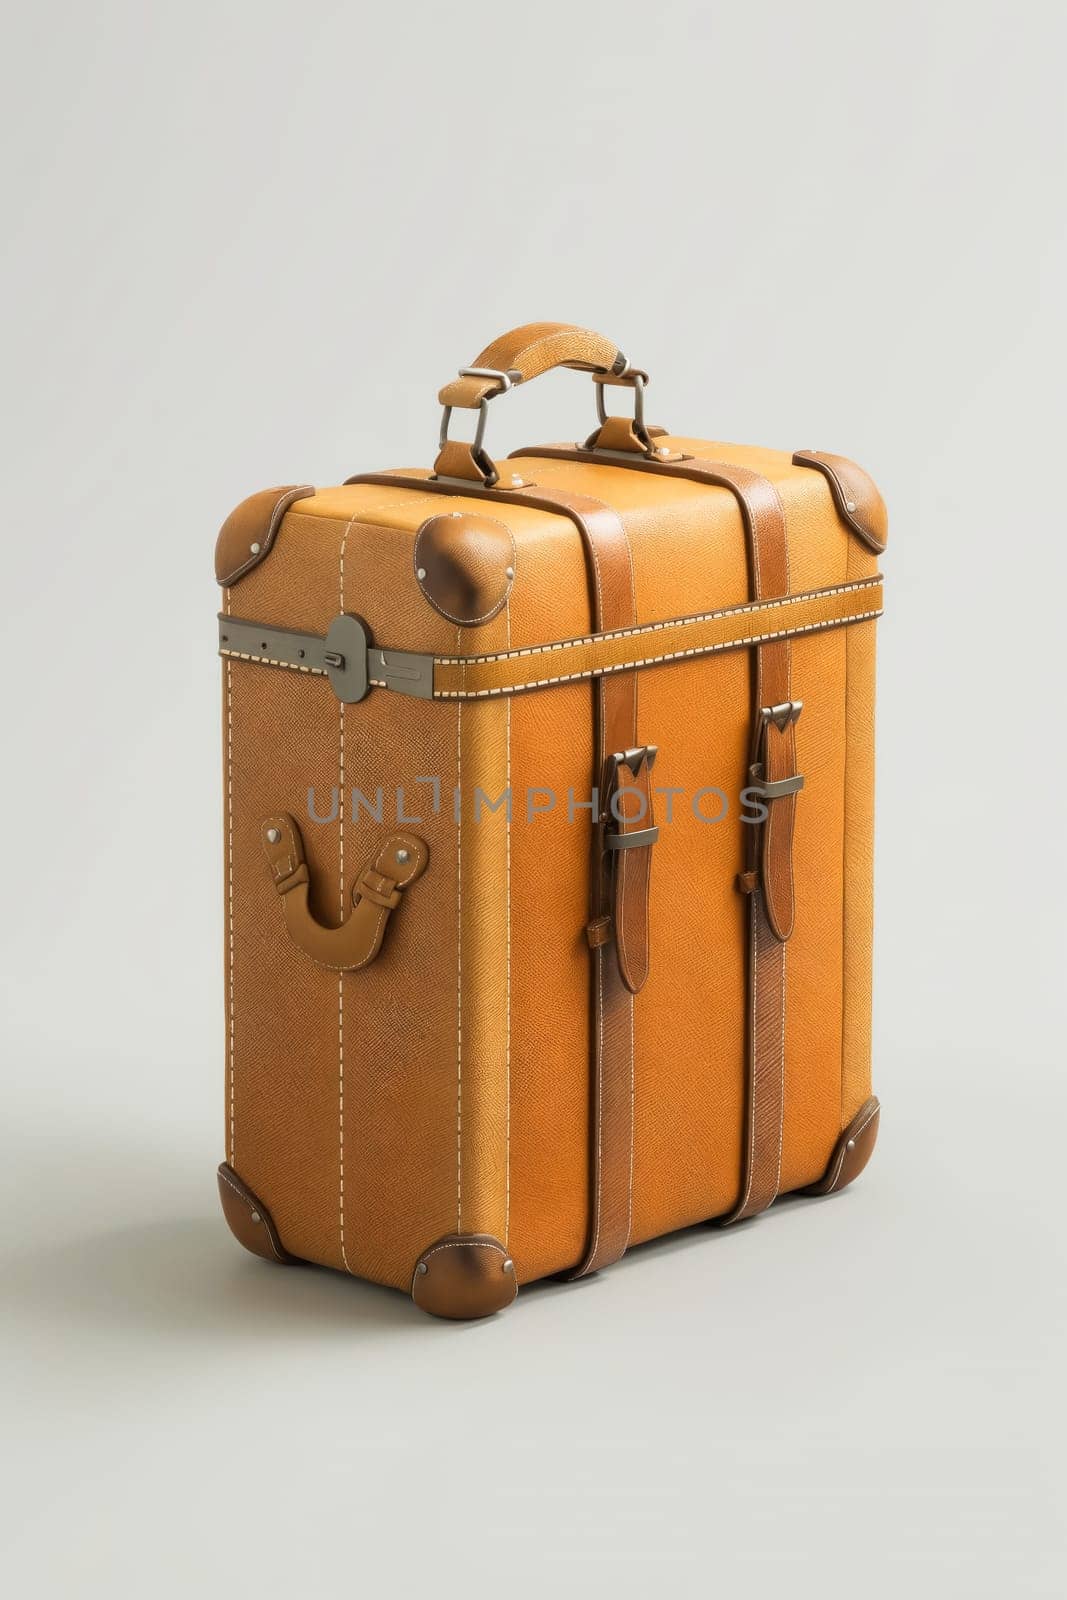 A brown suitcase with a gold handle sits on a white background. The suitcase is old and has a vintage look to it. Generative AI